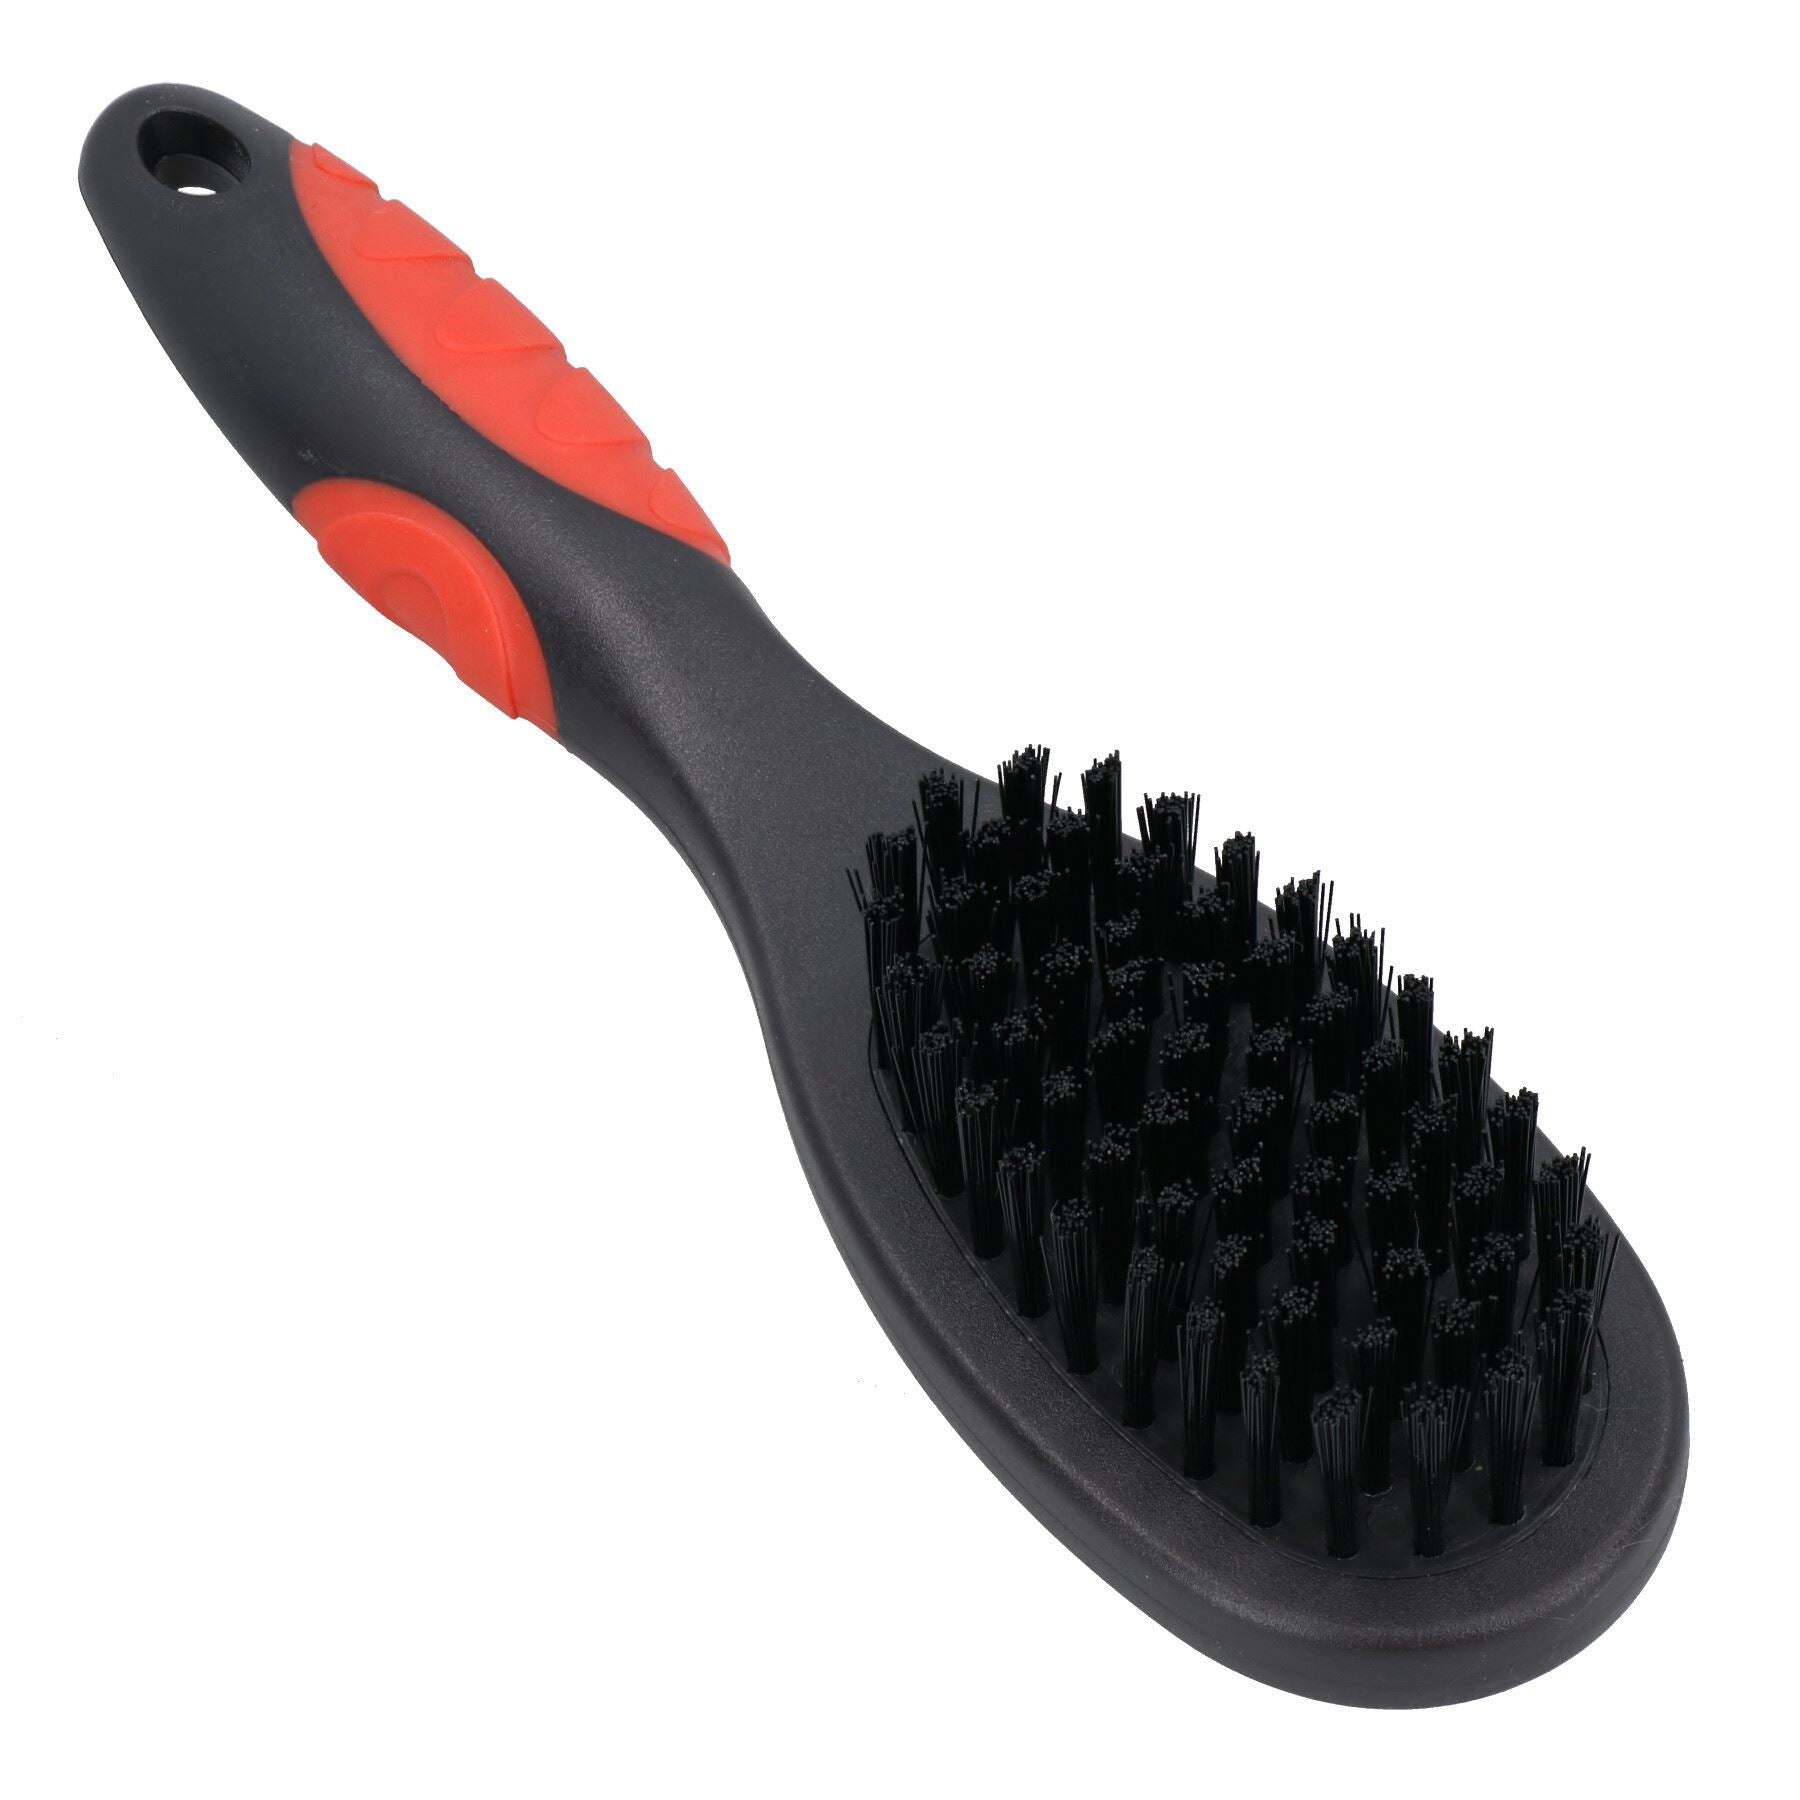 Small Soft Protection Cat Brush With Ergonomic Hand Grip Cat Pet Grooming